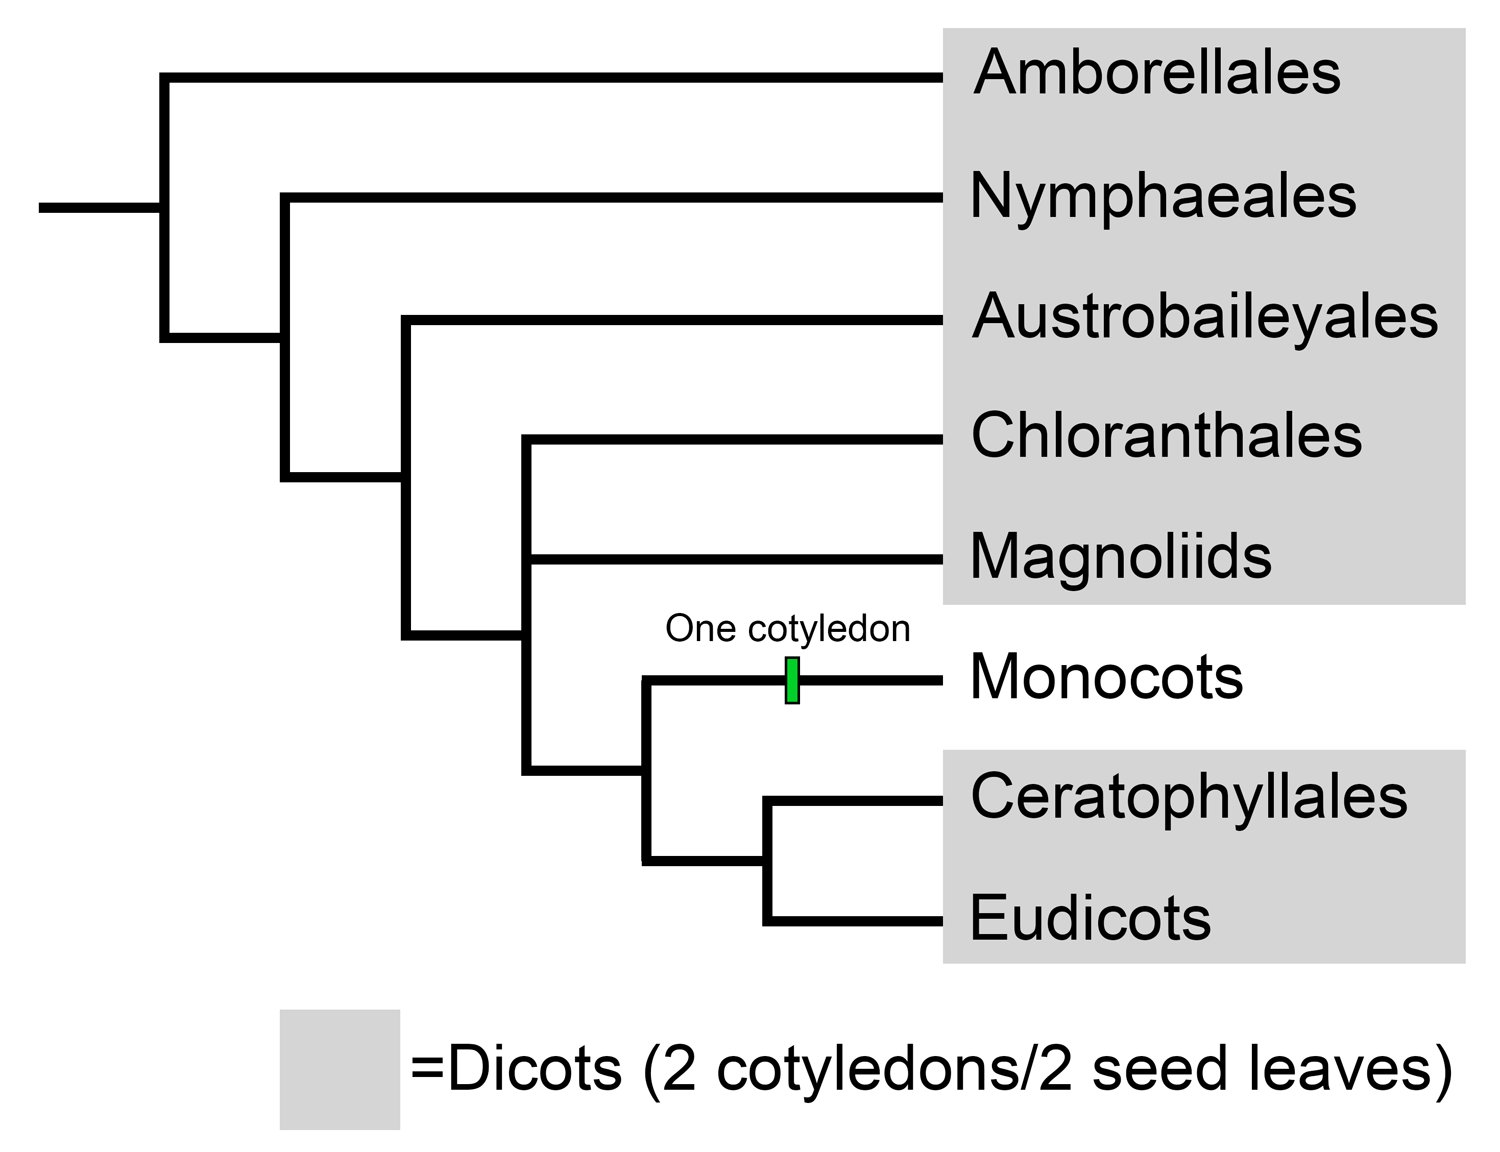 Diagram of angiosperm relationships showing dicot groups. Dicots include Amborellales, Nymphaeales, Austrobaileyales, Chloranthales, Magnoliids, Ceratophyllales, and Eudicots.